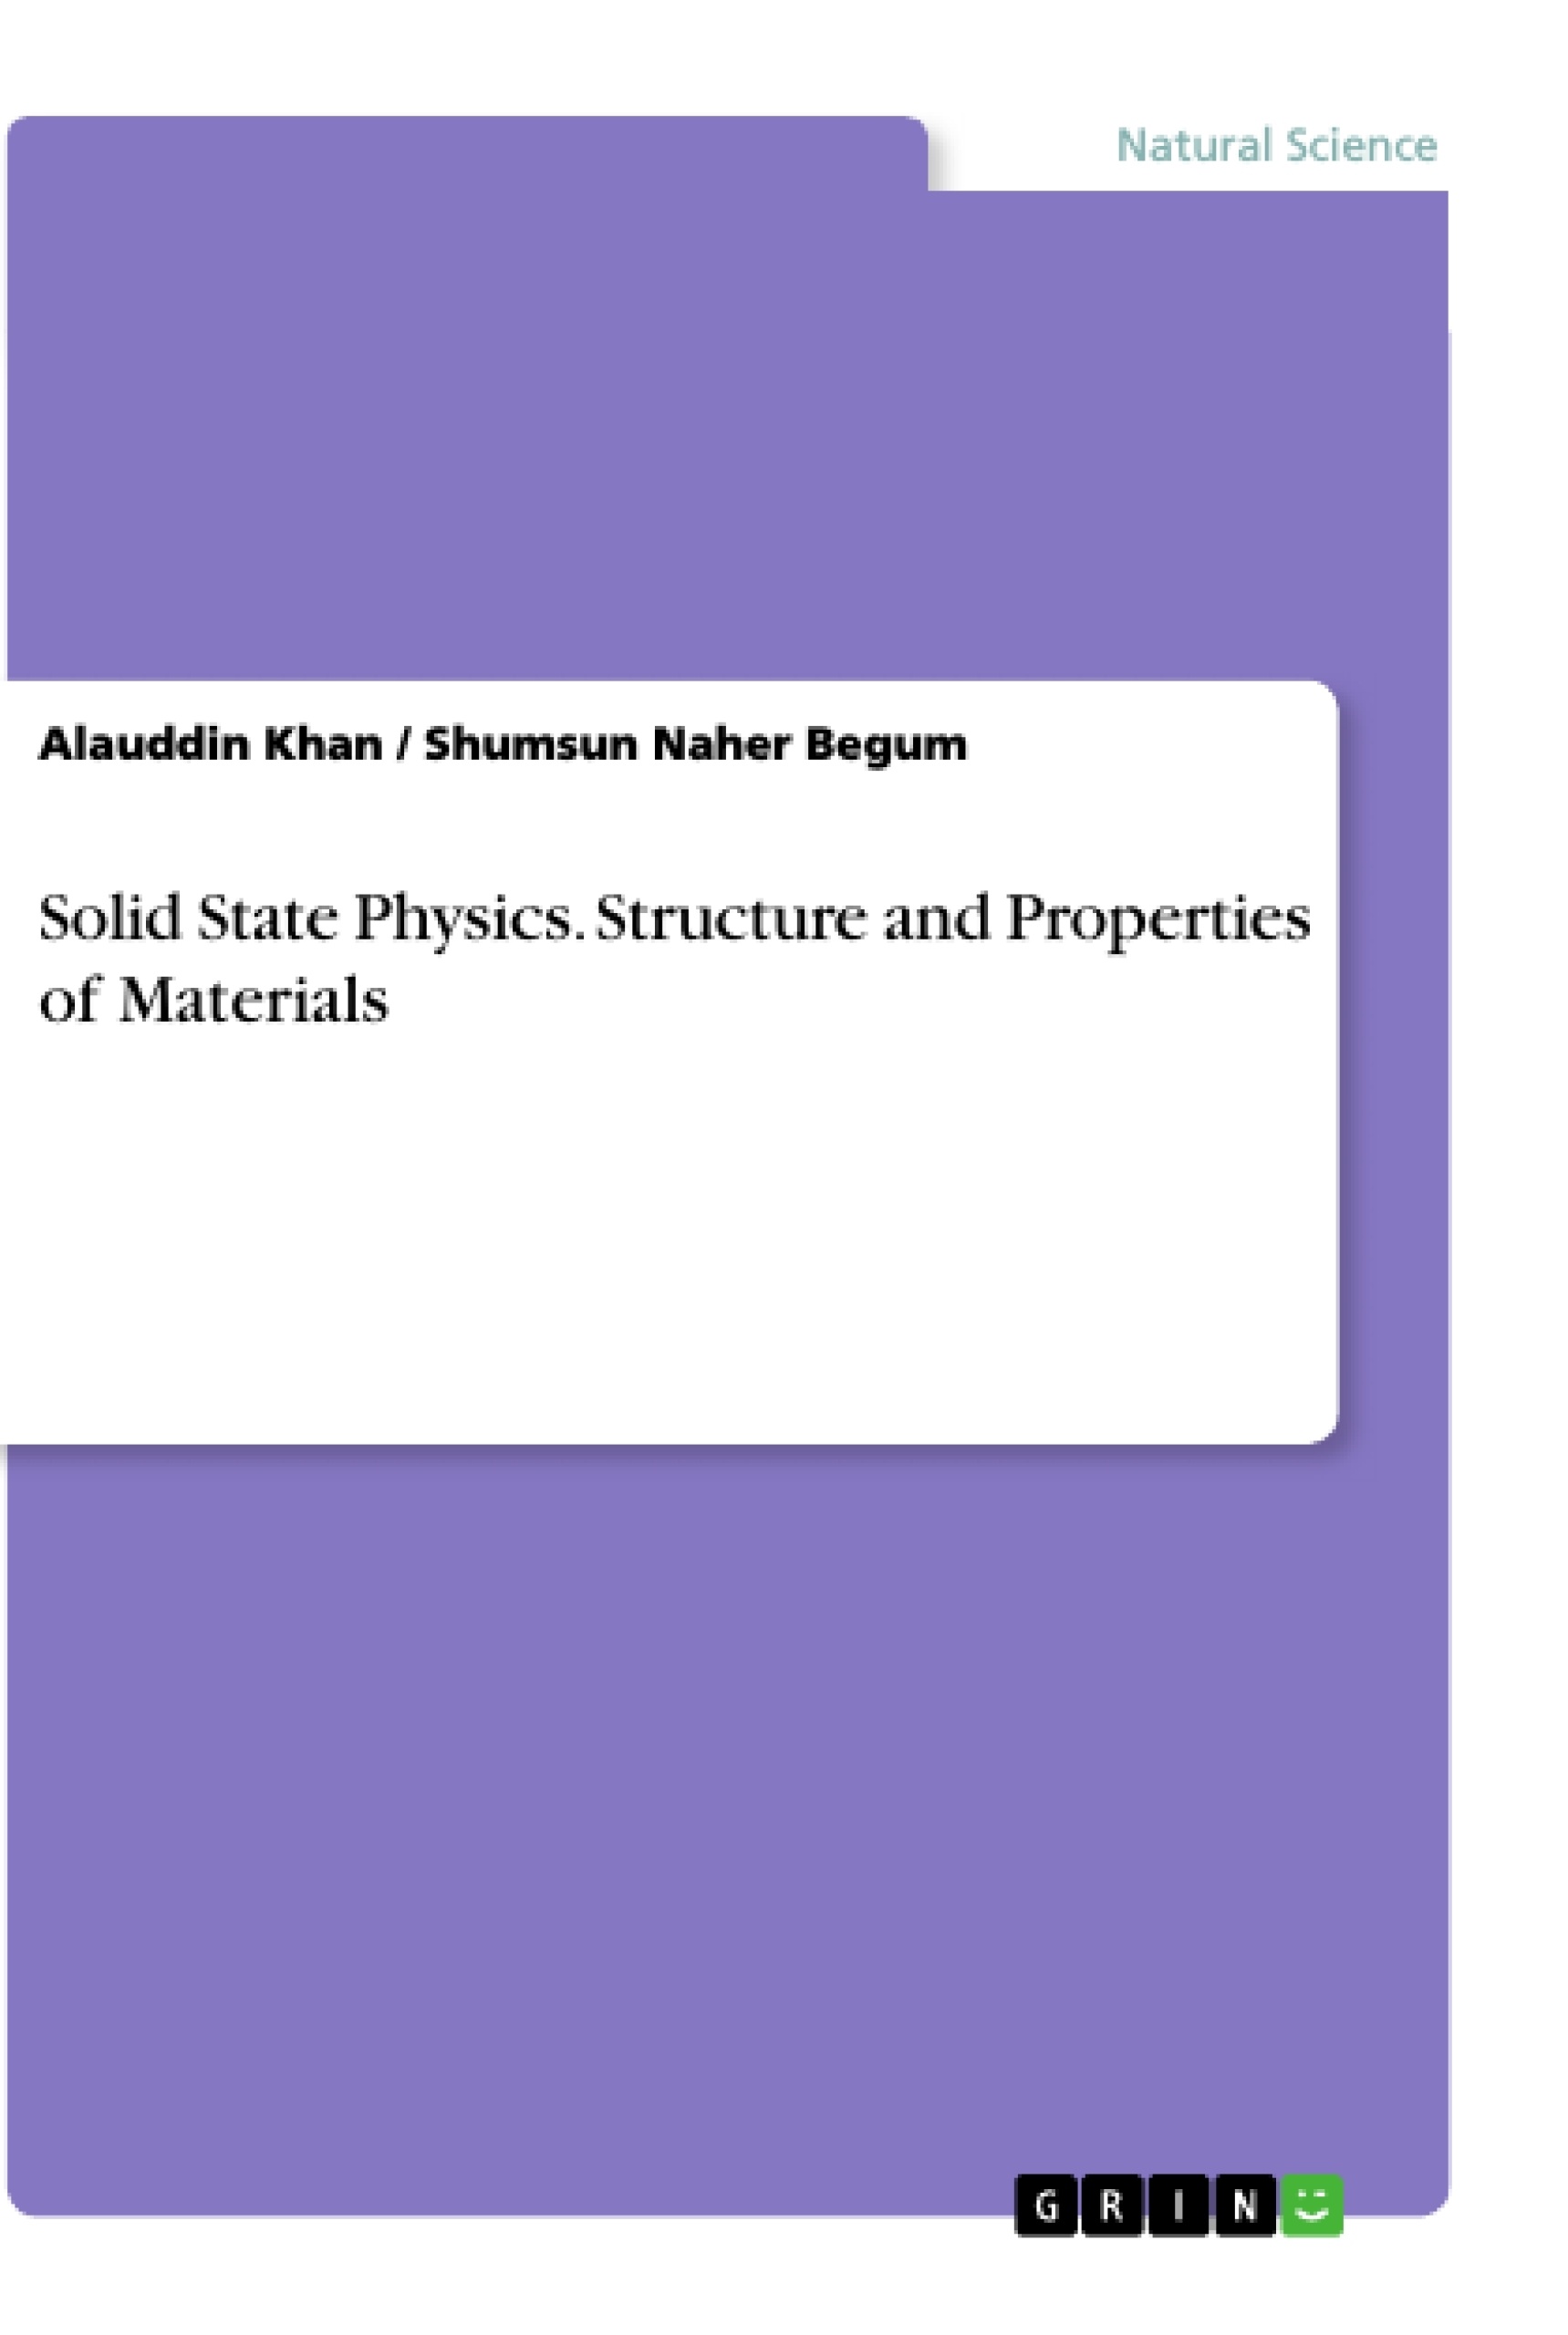 Title: Solid State Physics. Structure and Properties of Materials